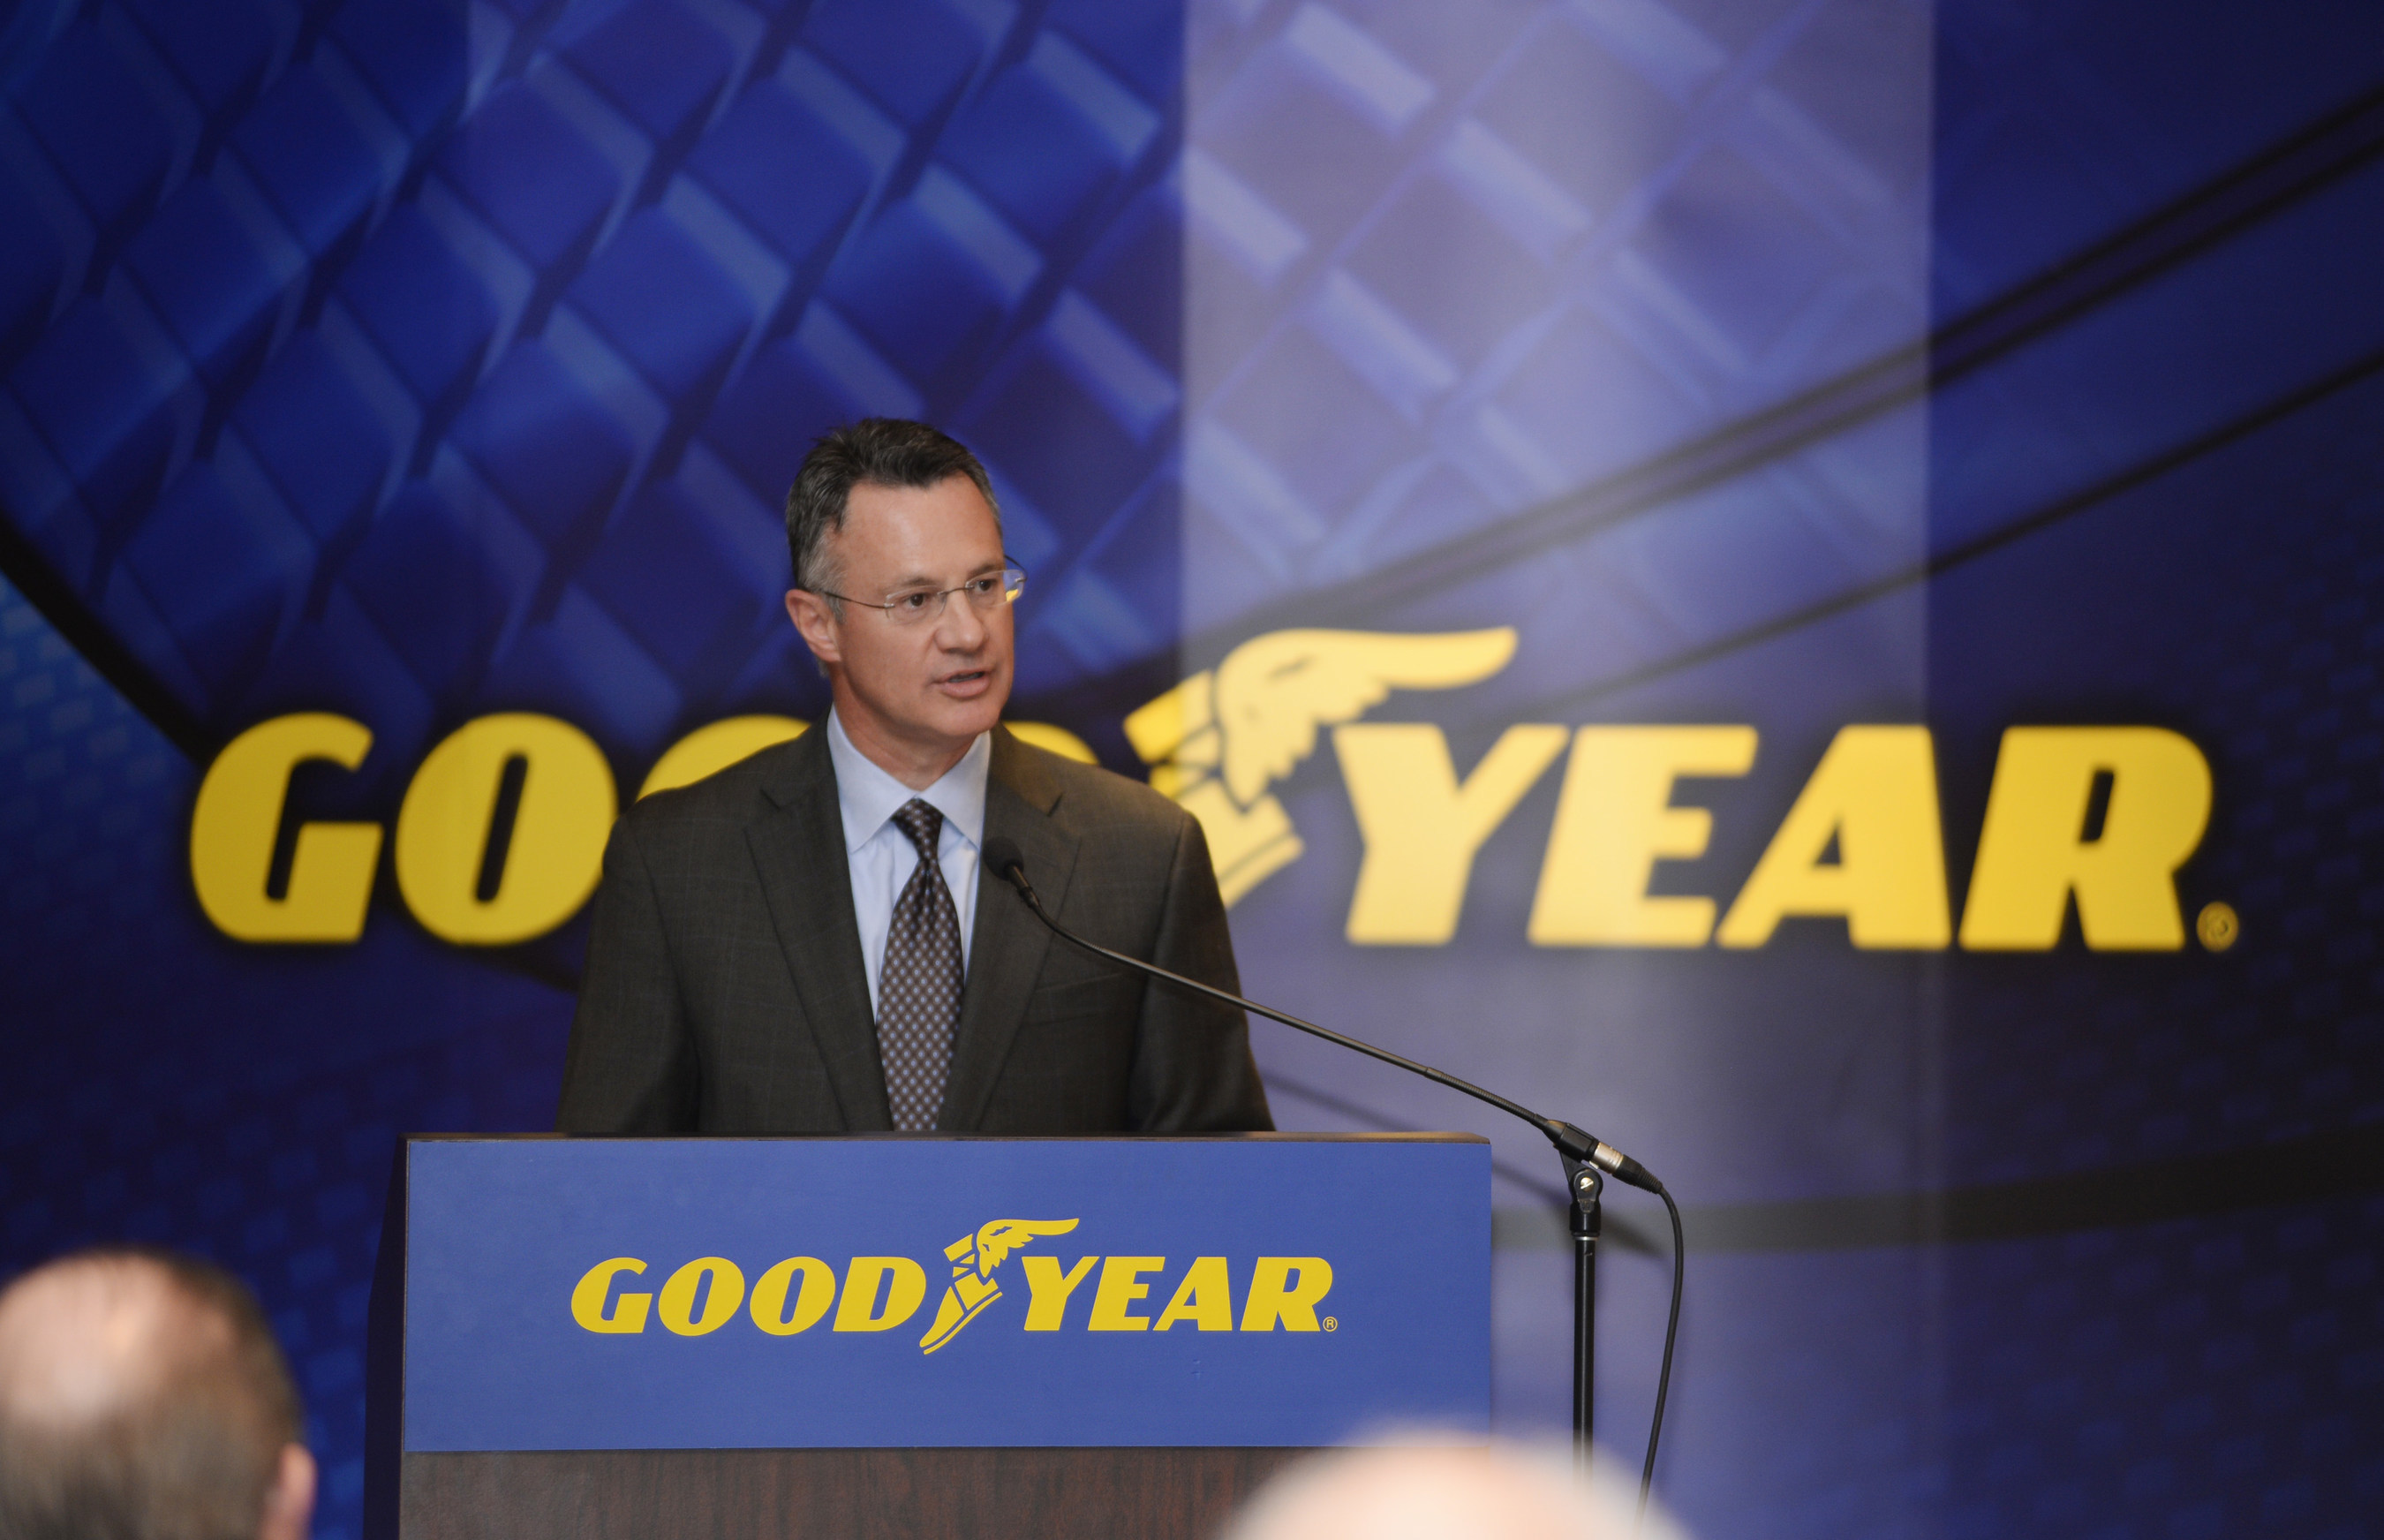 Richard J. Kramer, chairman and chief executive officer of The Goodyear Tire & Rubber Company, speaks at the Annual Shareholders' Meeting on April 13, 2015.  Kramer told shareholders that the record-setting earnings achieved in 2014 were a big step on Goodyear's path to long-term growth.